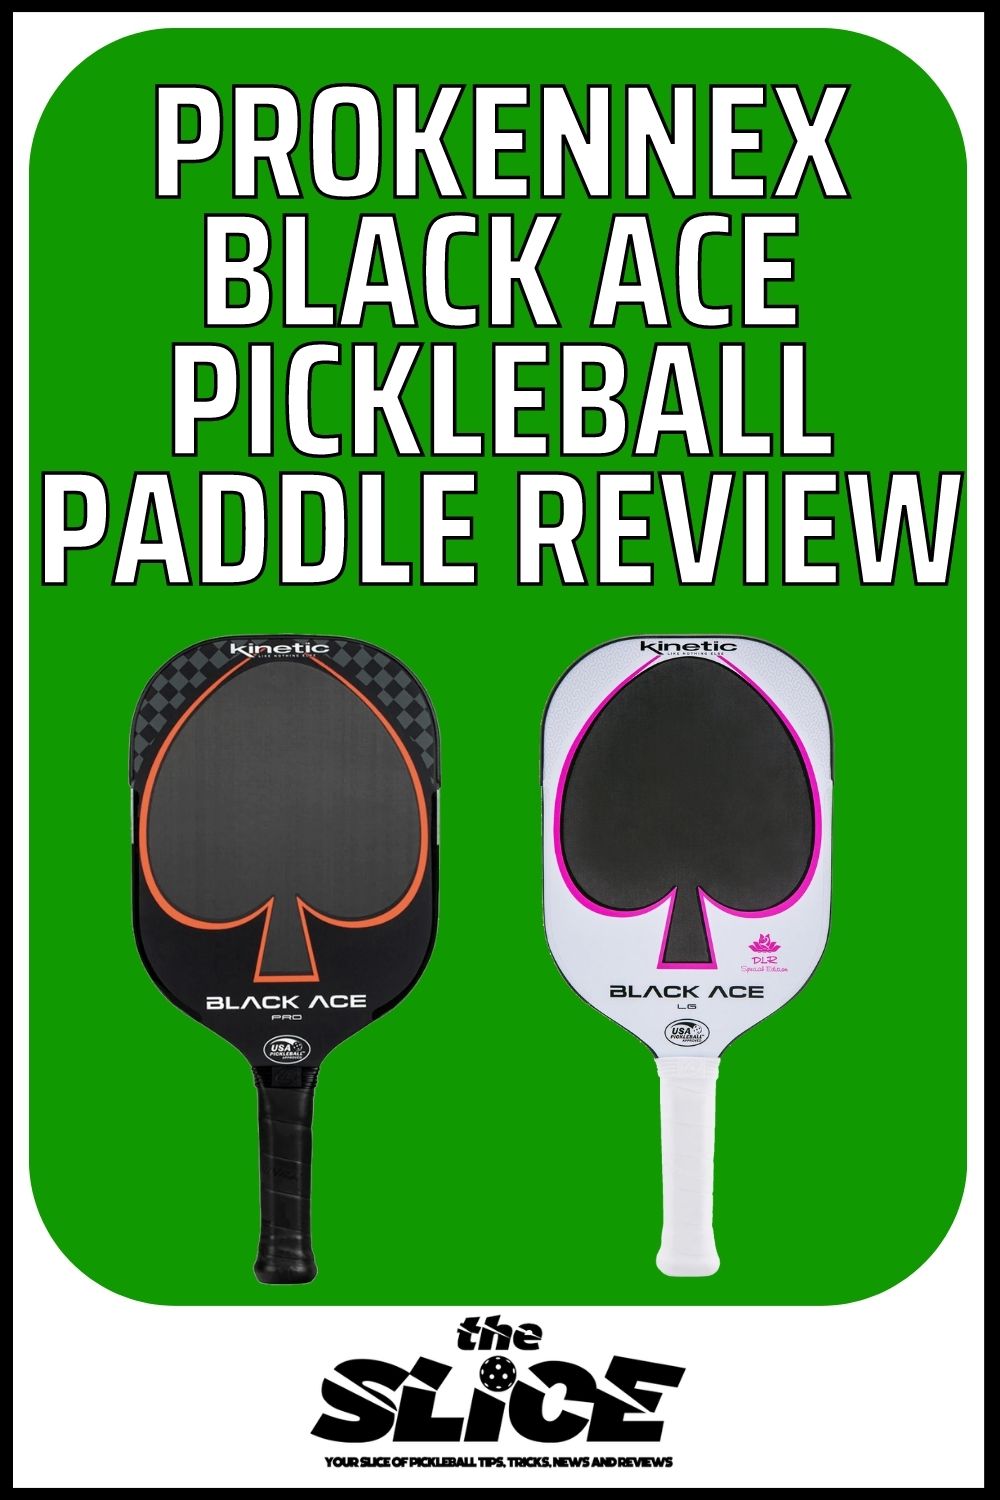 Prokennex Black Ace Paddle Review